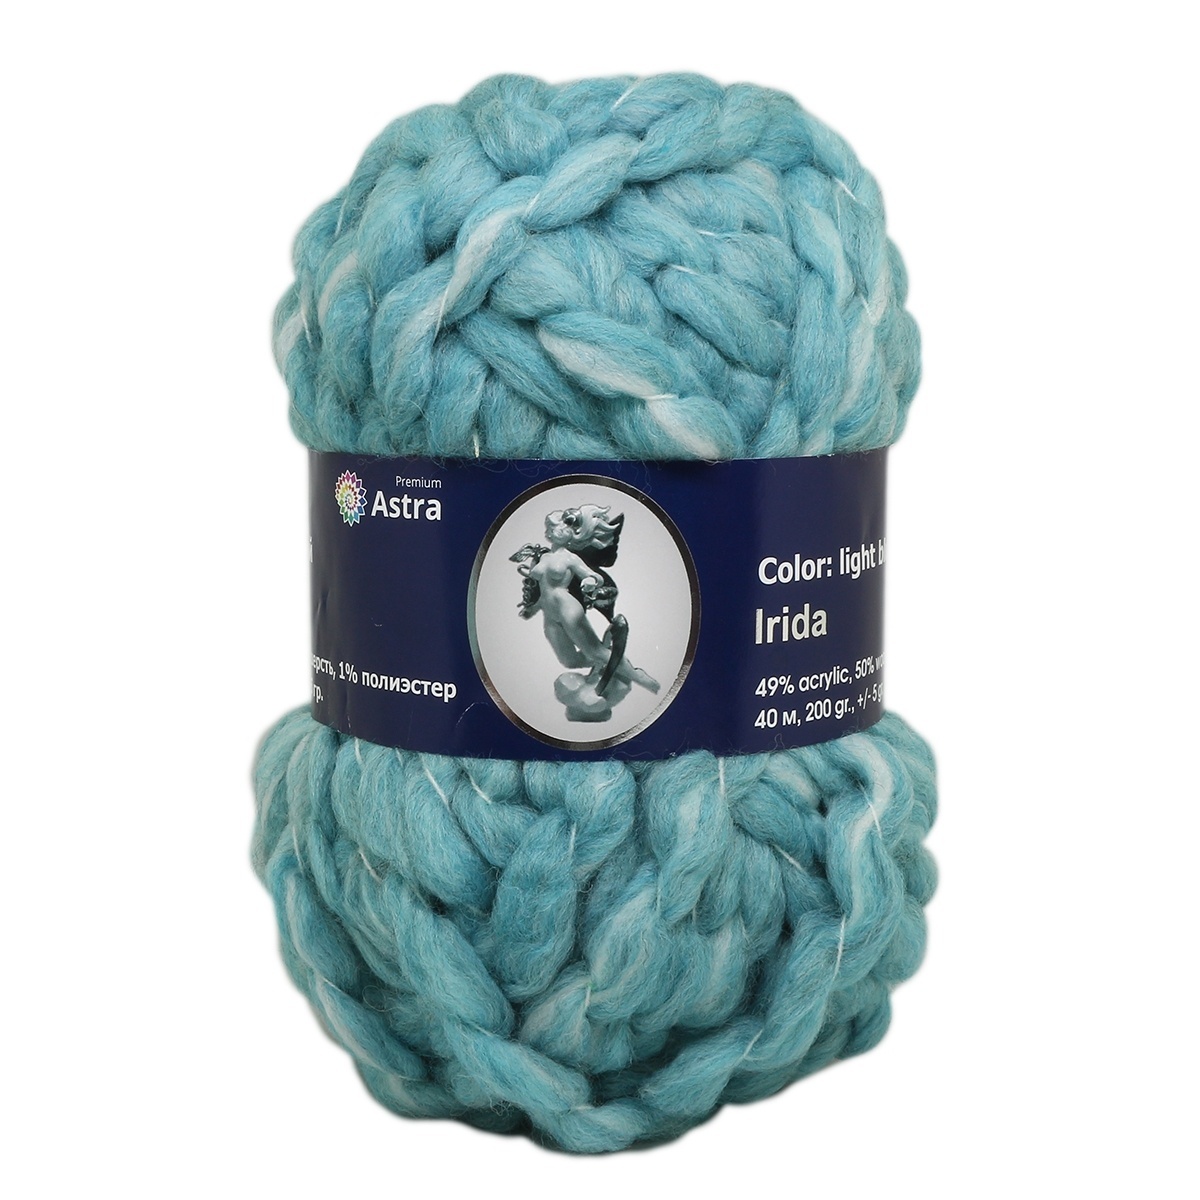 Astra Premium Iris, 50% wool, 49% acrylic, 1% polyester, 2 Skein Value Pack, 400g фото 5